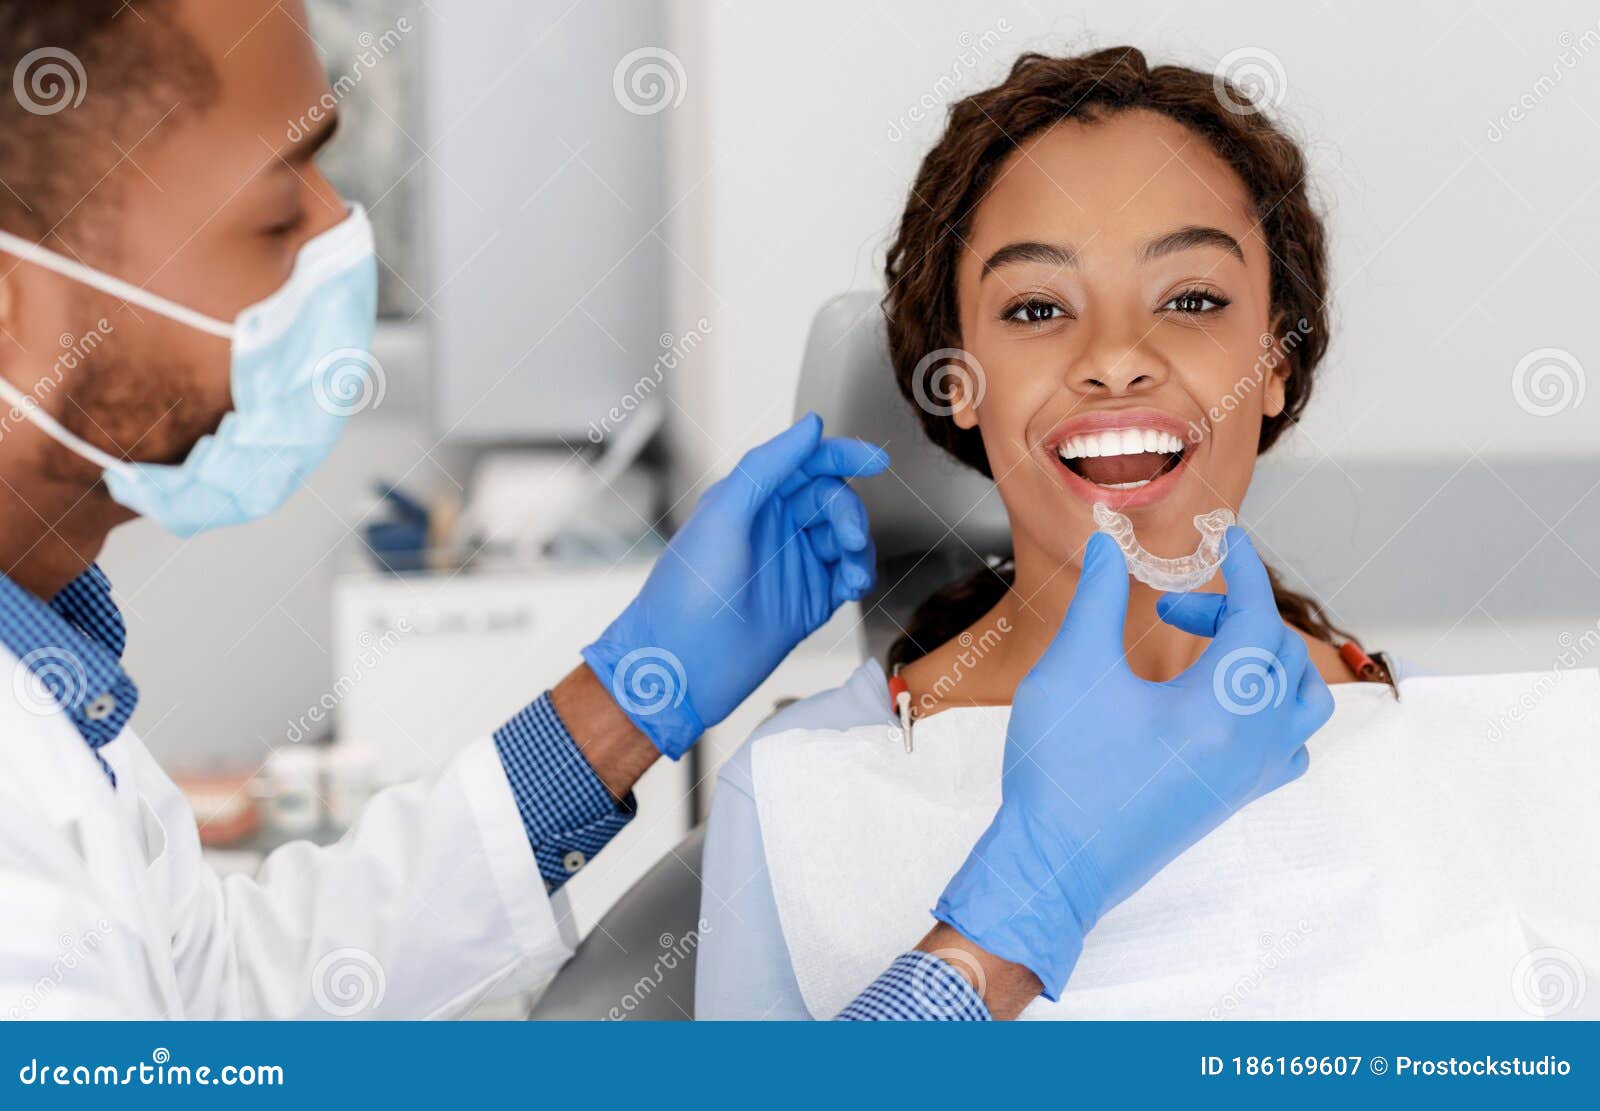 dentist applying invisible aligner on female patient teeth